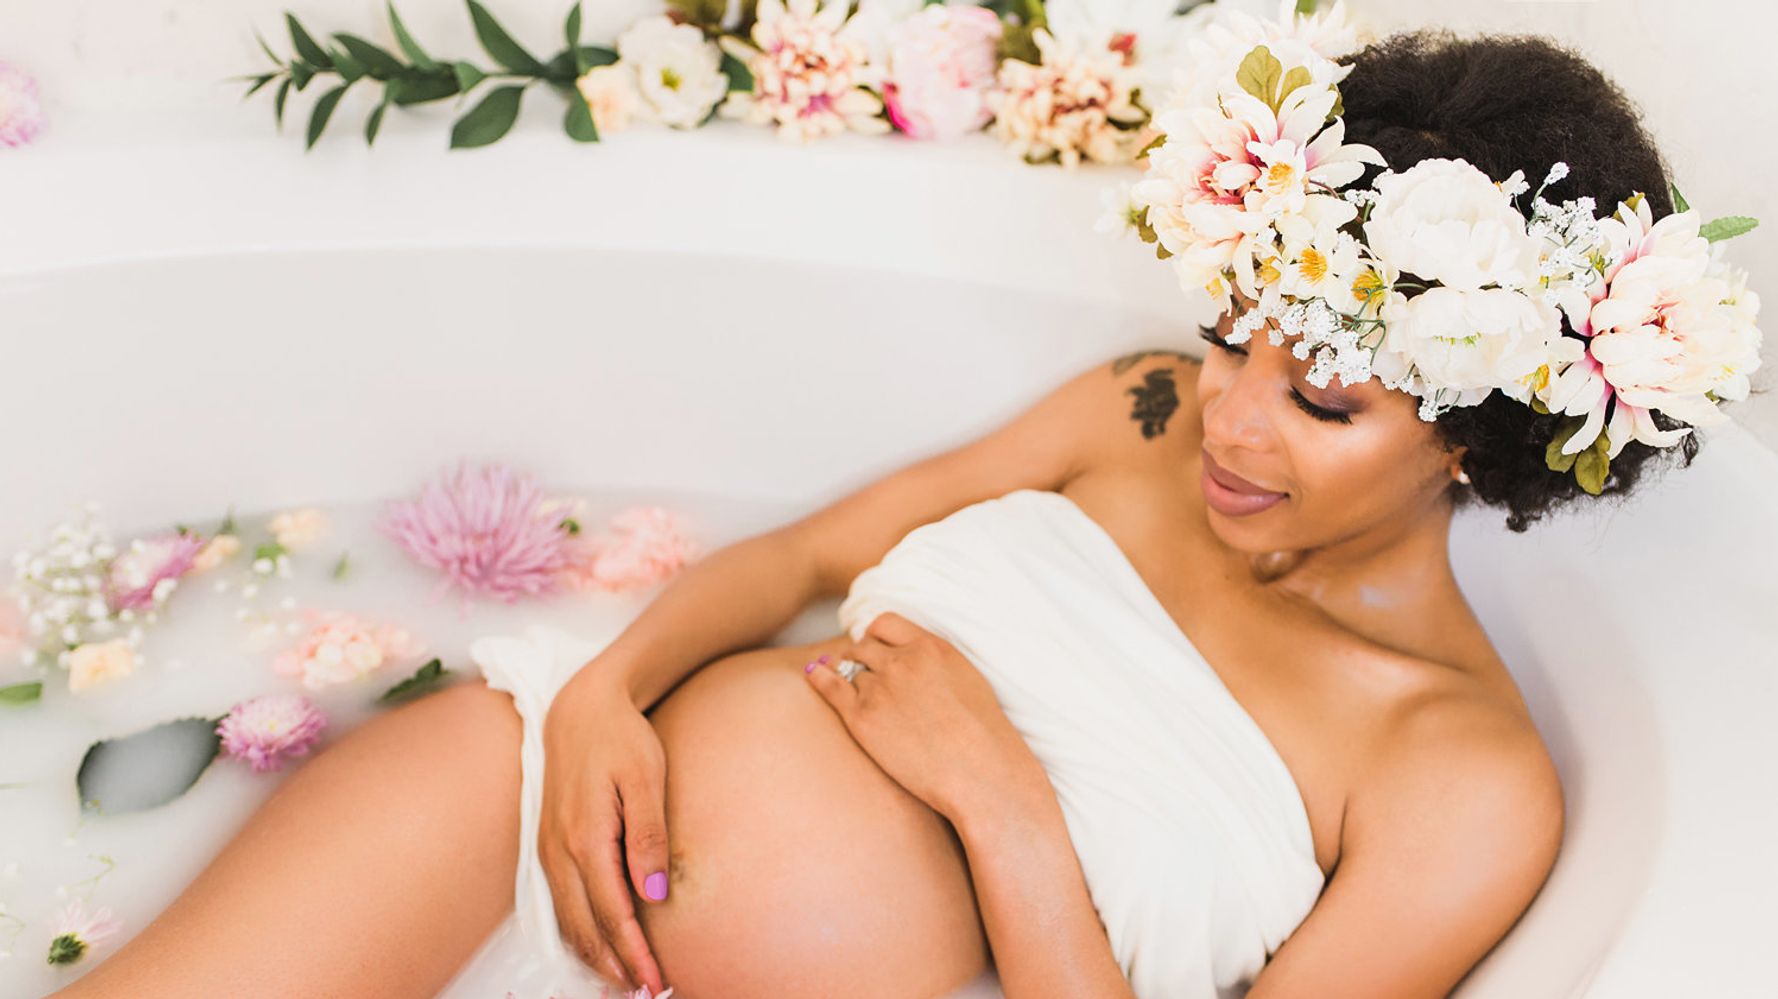 This Mom-To-Be's Stunning Maternity Photos Are A Pinterest Dream Come True